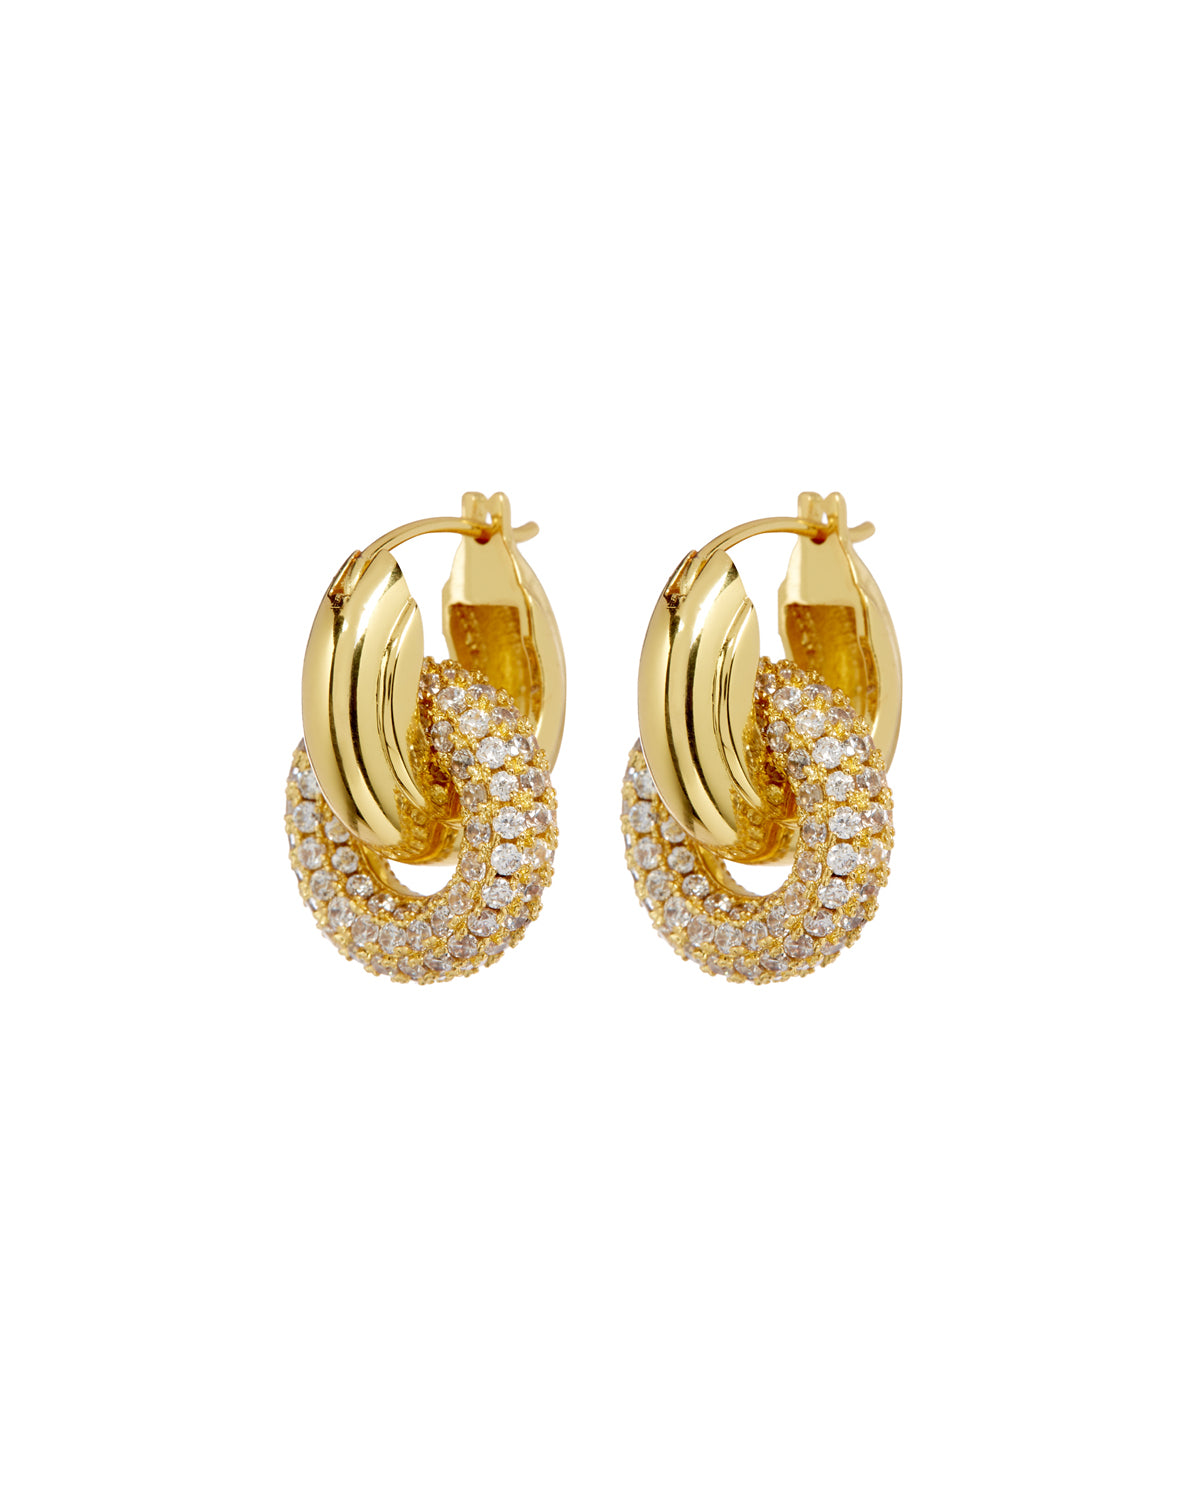 Luv Aj Pave Interlock Hoop Earrings in CZ and Polished 14k Antique Gold Plated